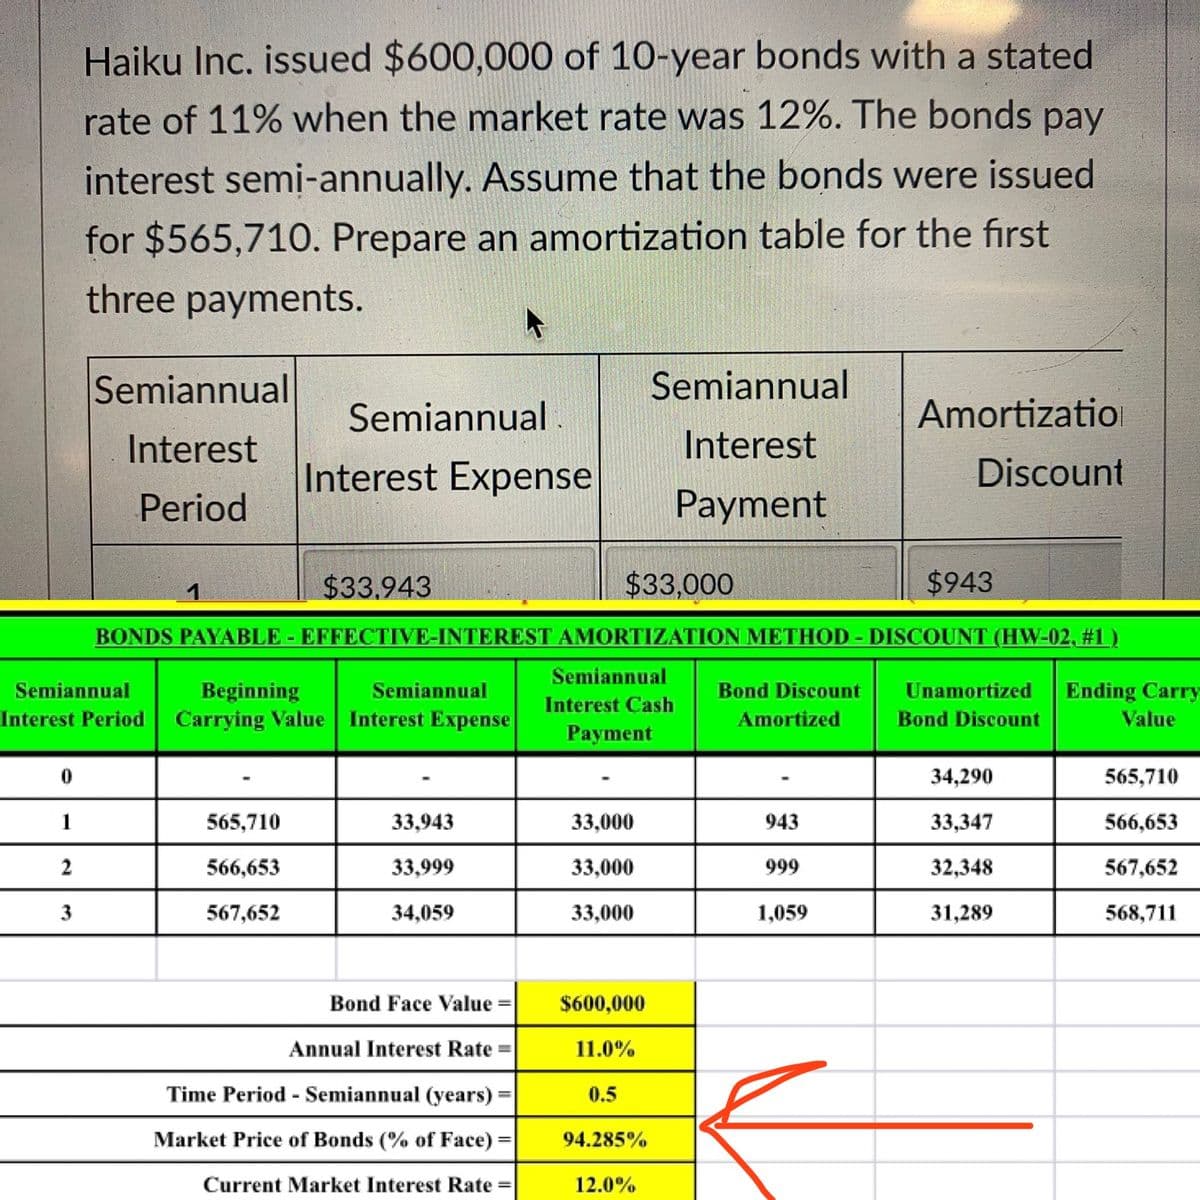 Haiku Inc. issued $600,000 of 10-year bonds with a stated
rate of 11% when the market rate was 12%. The bonds pay
interest semi-annually. Assume that the bonds were issued
for $565,710. Prepare an amortization table for the first
three payments.
Semiannual
Semiannual
Semiannual .
Amortization
Interest
Interest
Interest Expense
Discount
Period
Payment
$33.943
$33,000
$943
BONDS PAYABLE - EFFECTIVE-INTEREST AMORTIZATION METHOD - DISCOUNT (HW-02, #1)
Semiannual
Bond Discount
Beginning
Interest Period Carrying Value Interest Expense
Semiannual
Semiannual
Unamortized
Ending Carry
Interest Cash
Amortized
Bond Discount
Value
Payment
34,290
565,710
1
565,710
33,943
33,000
943
33,347
566,653
2
566,653
33,999
33,000
999
32,348
567,652
3
567,652
34,059
33,000
1,059
31,289
568,711
Bond Face Value =
$600,000
%3D
Annual Interest Rate =
11.0%
Time Period - Semiannual (years) =
0.5
Market Price of Bonds (% of Face) =
94.285%
Current Market Interest Rate =
12.0%
